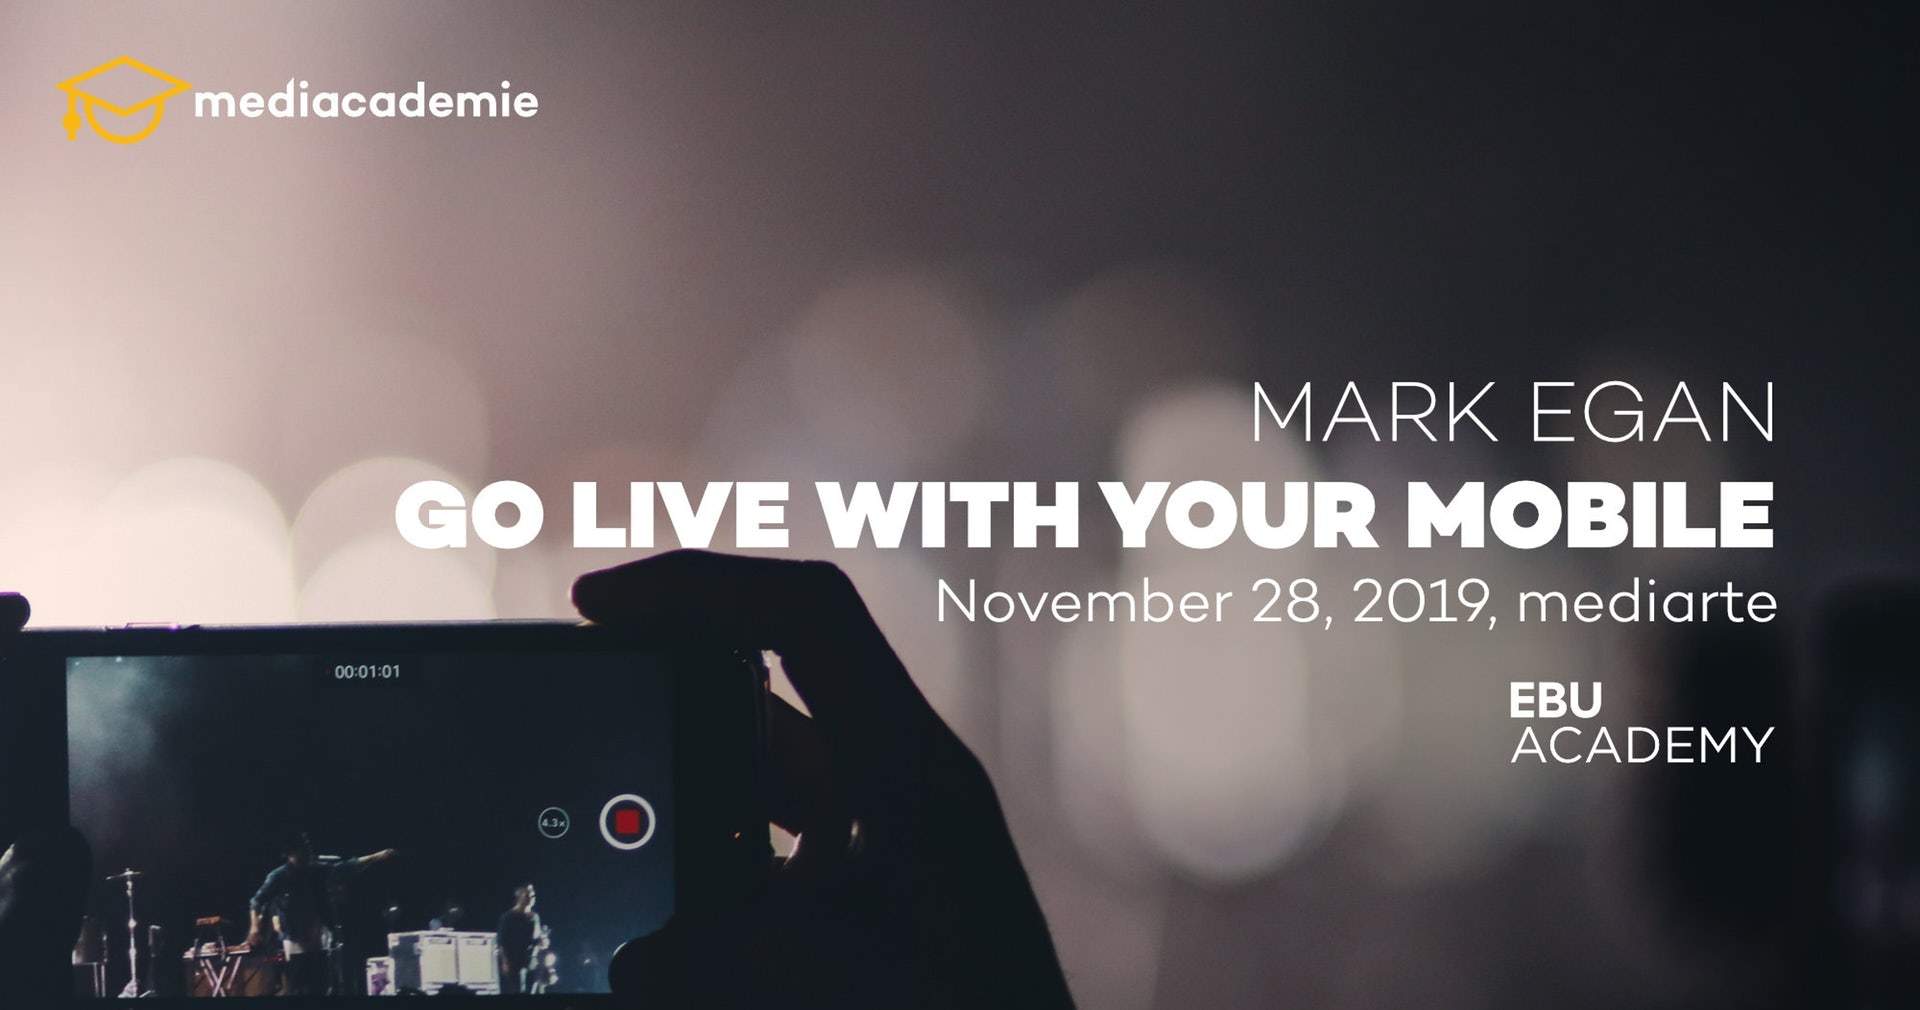 Go Live with your mobile